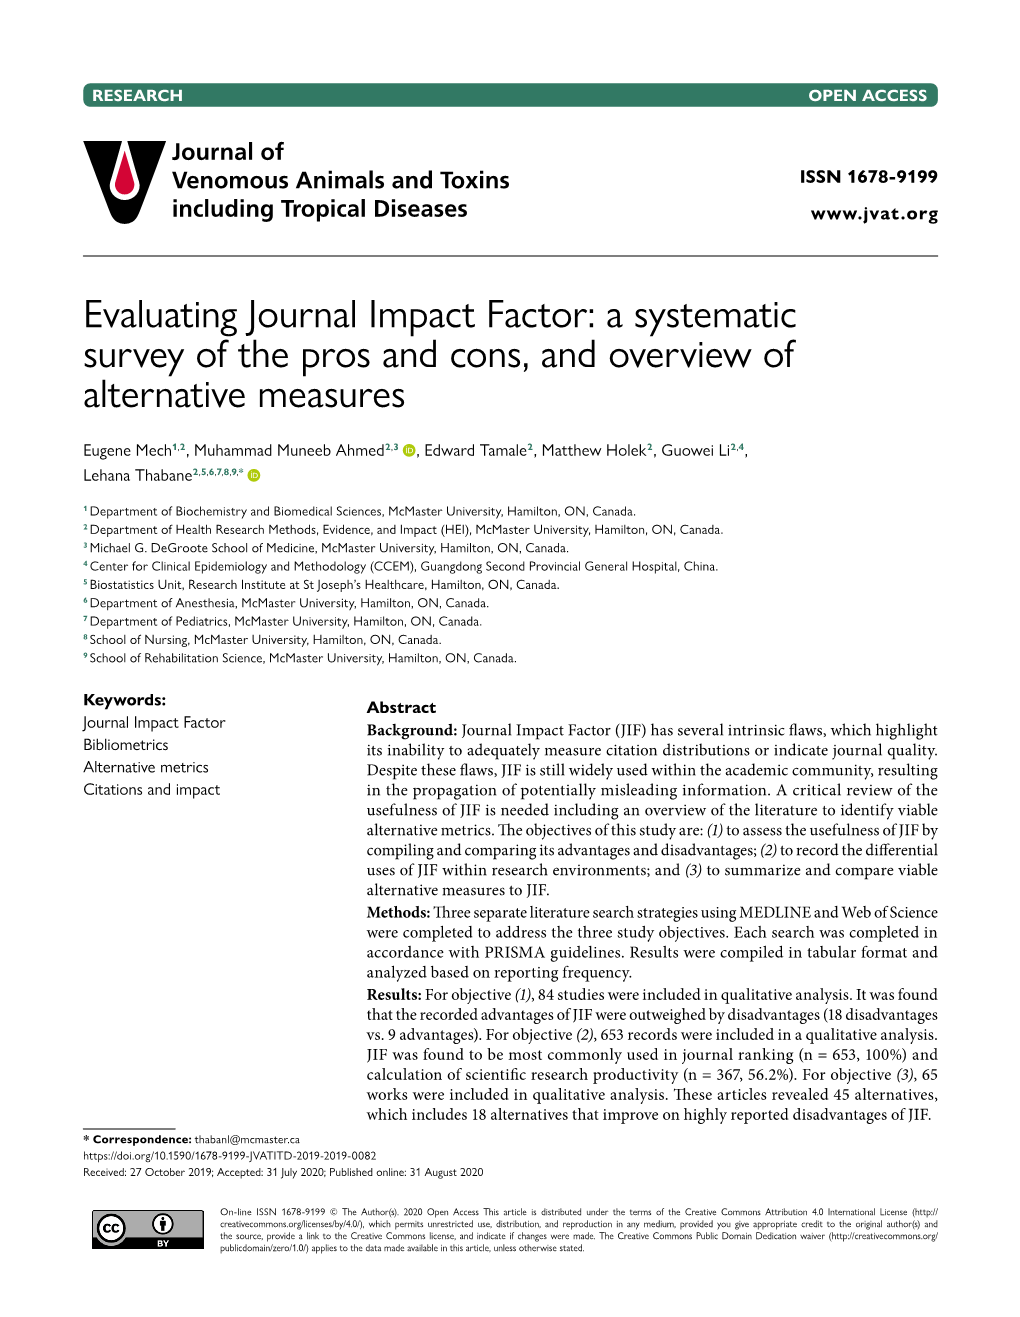 Evaluating Journal Impact Factor: a Systematic Survey of the Pros and Cons, and Overview of Alternative Measures